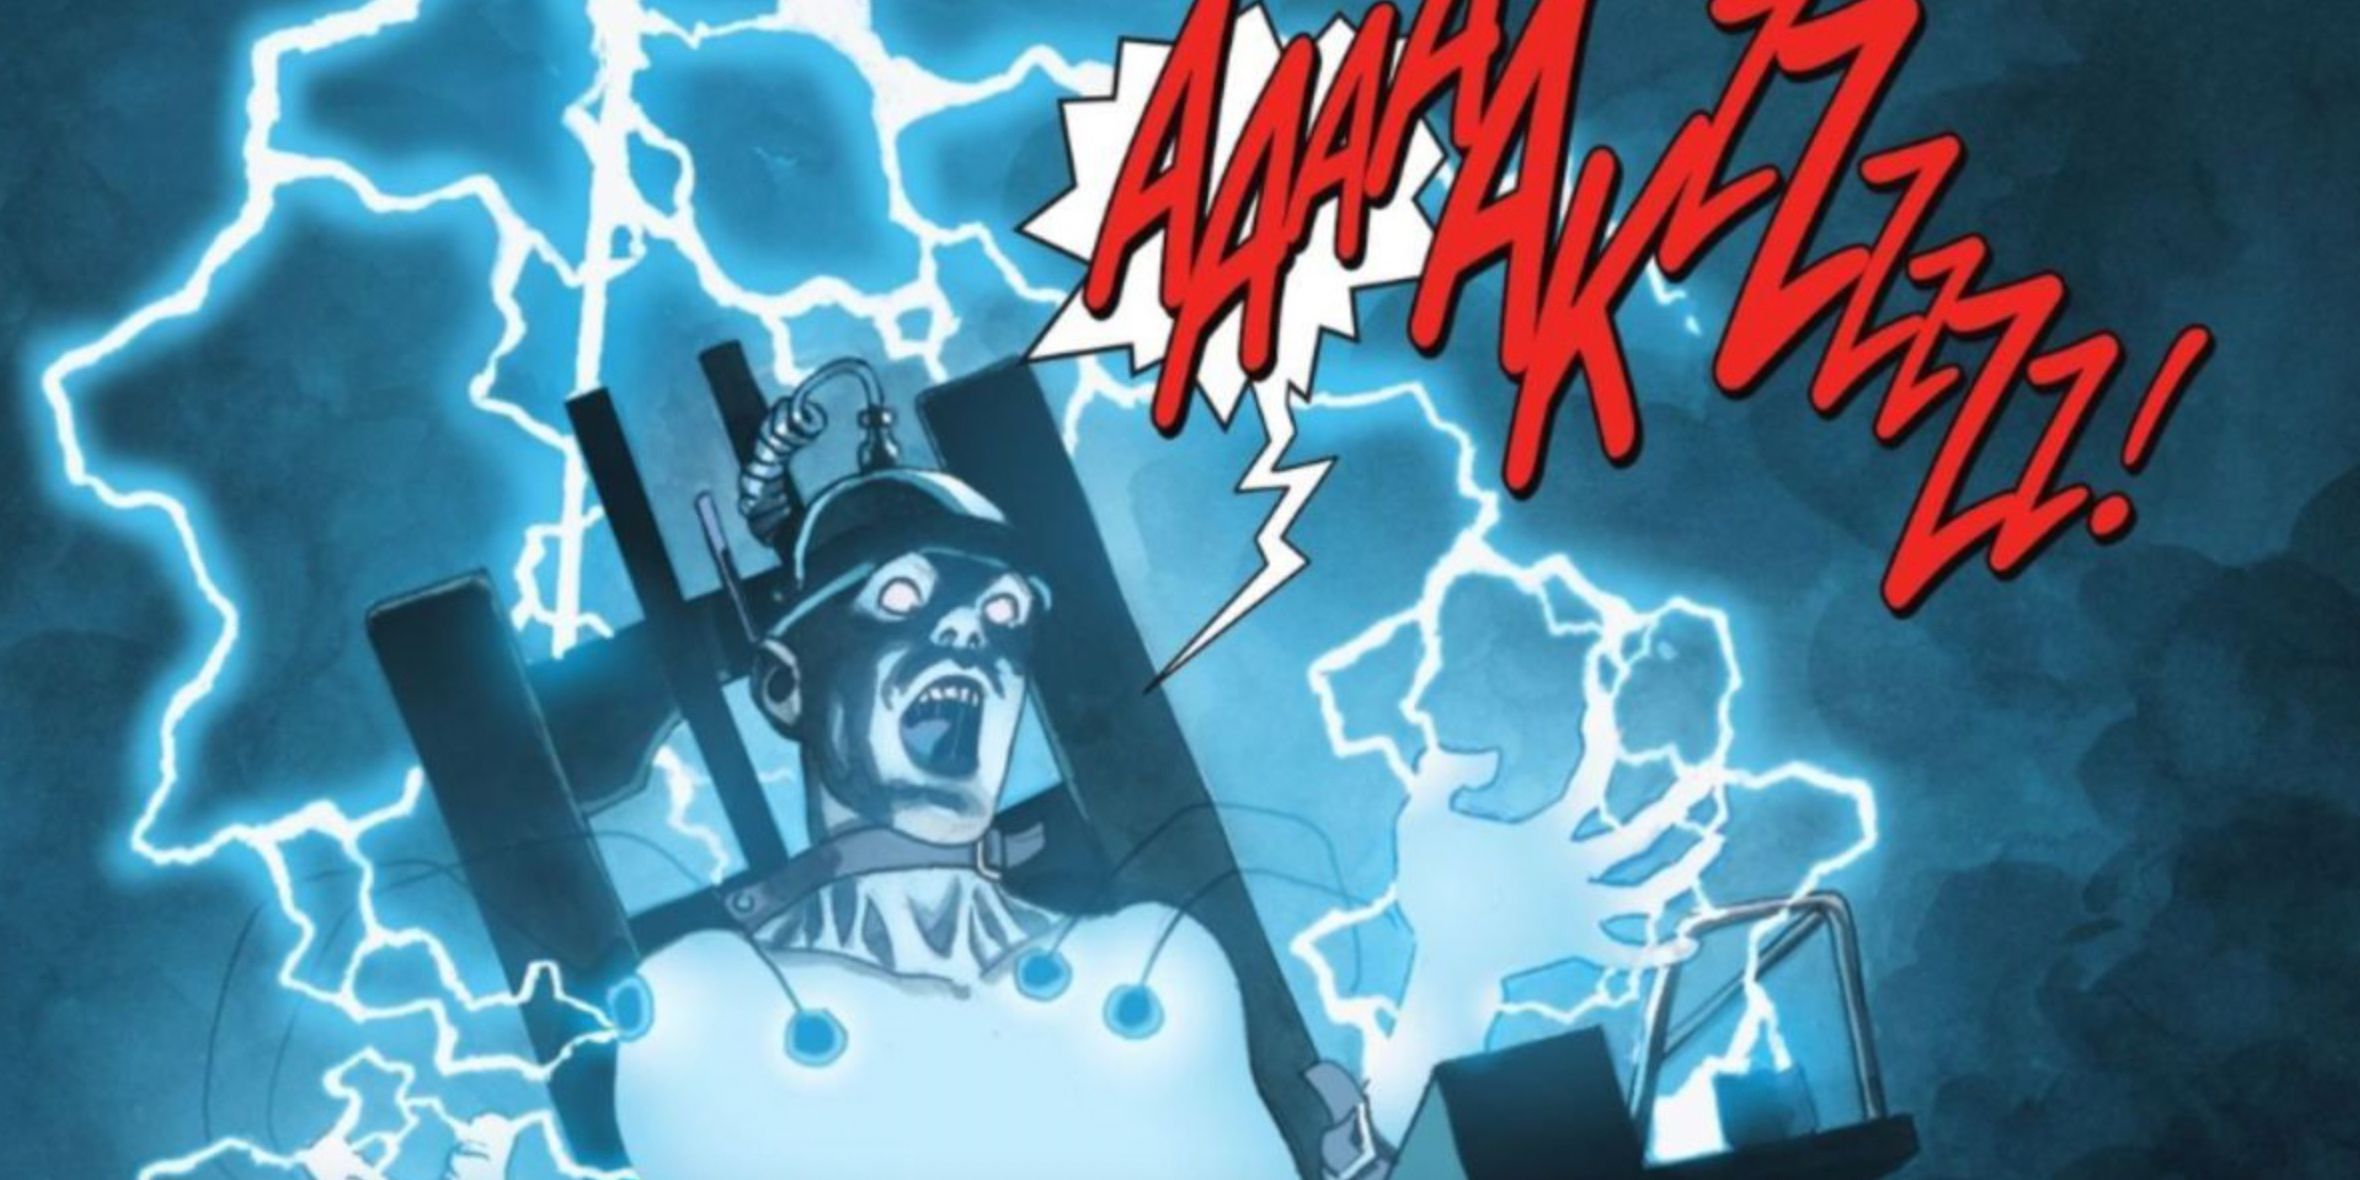 Barry Allen in an electrified chair in the Flashpoint comic